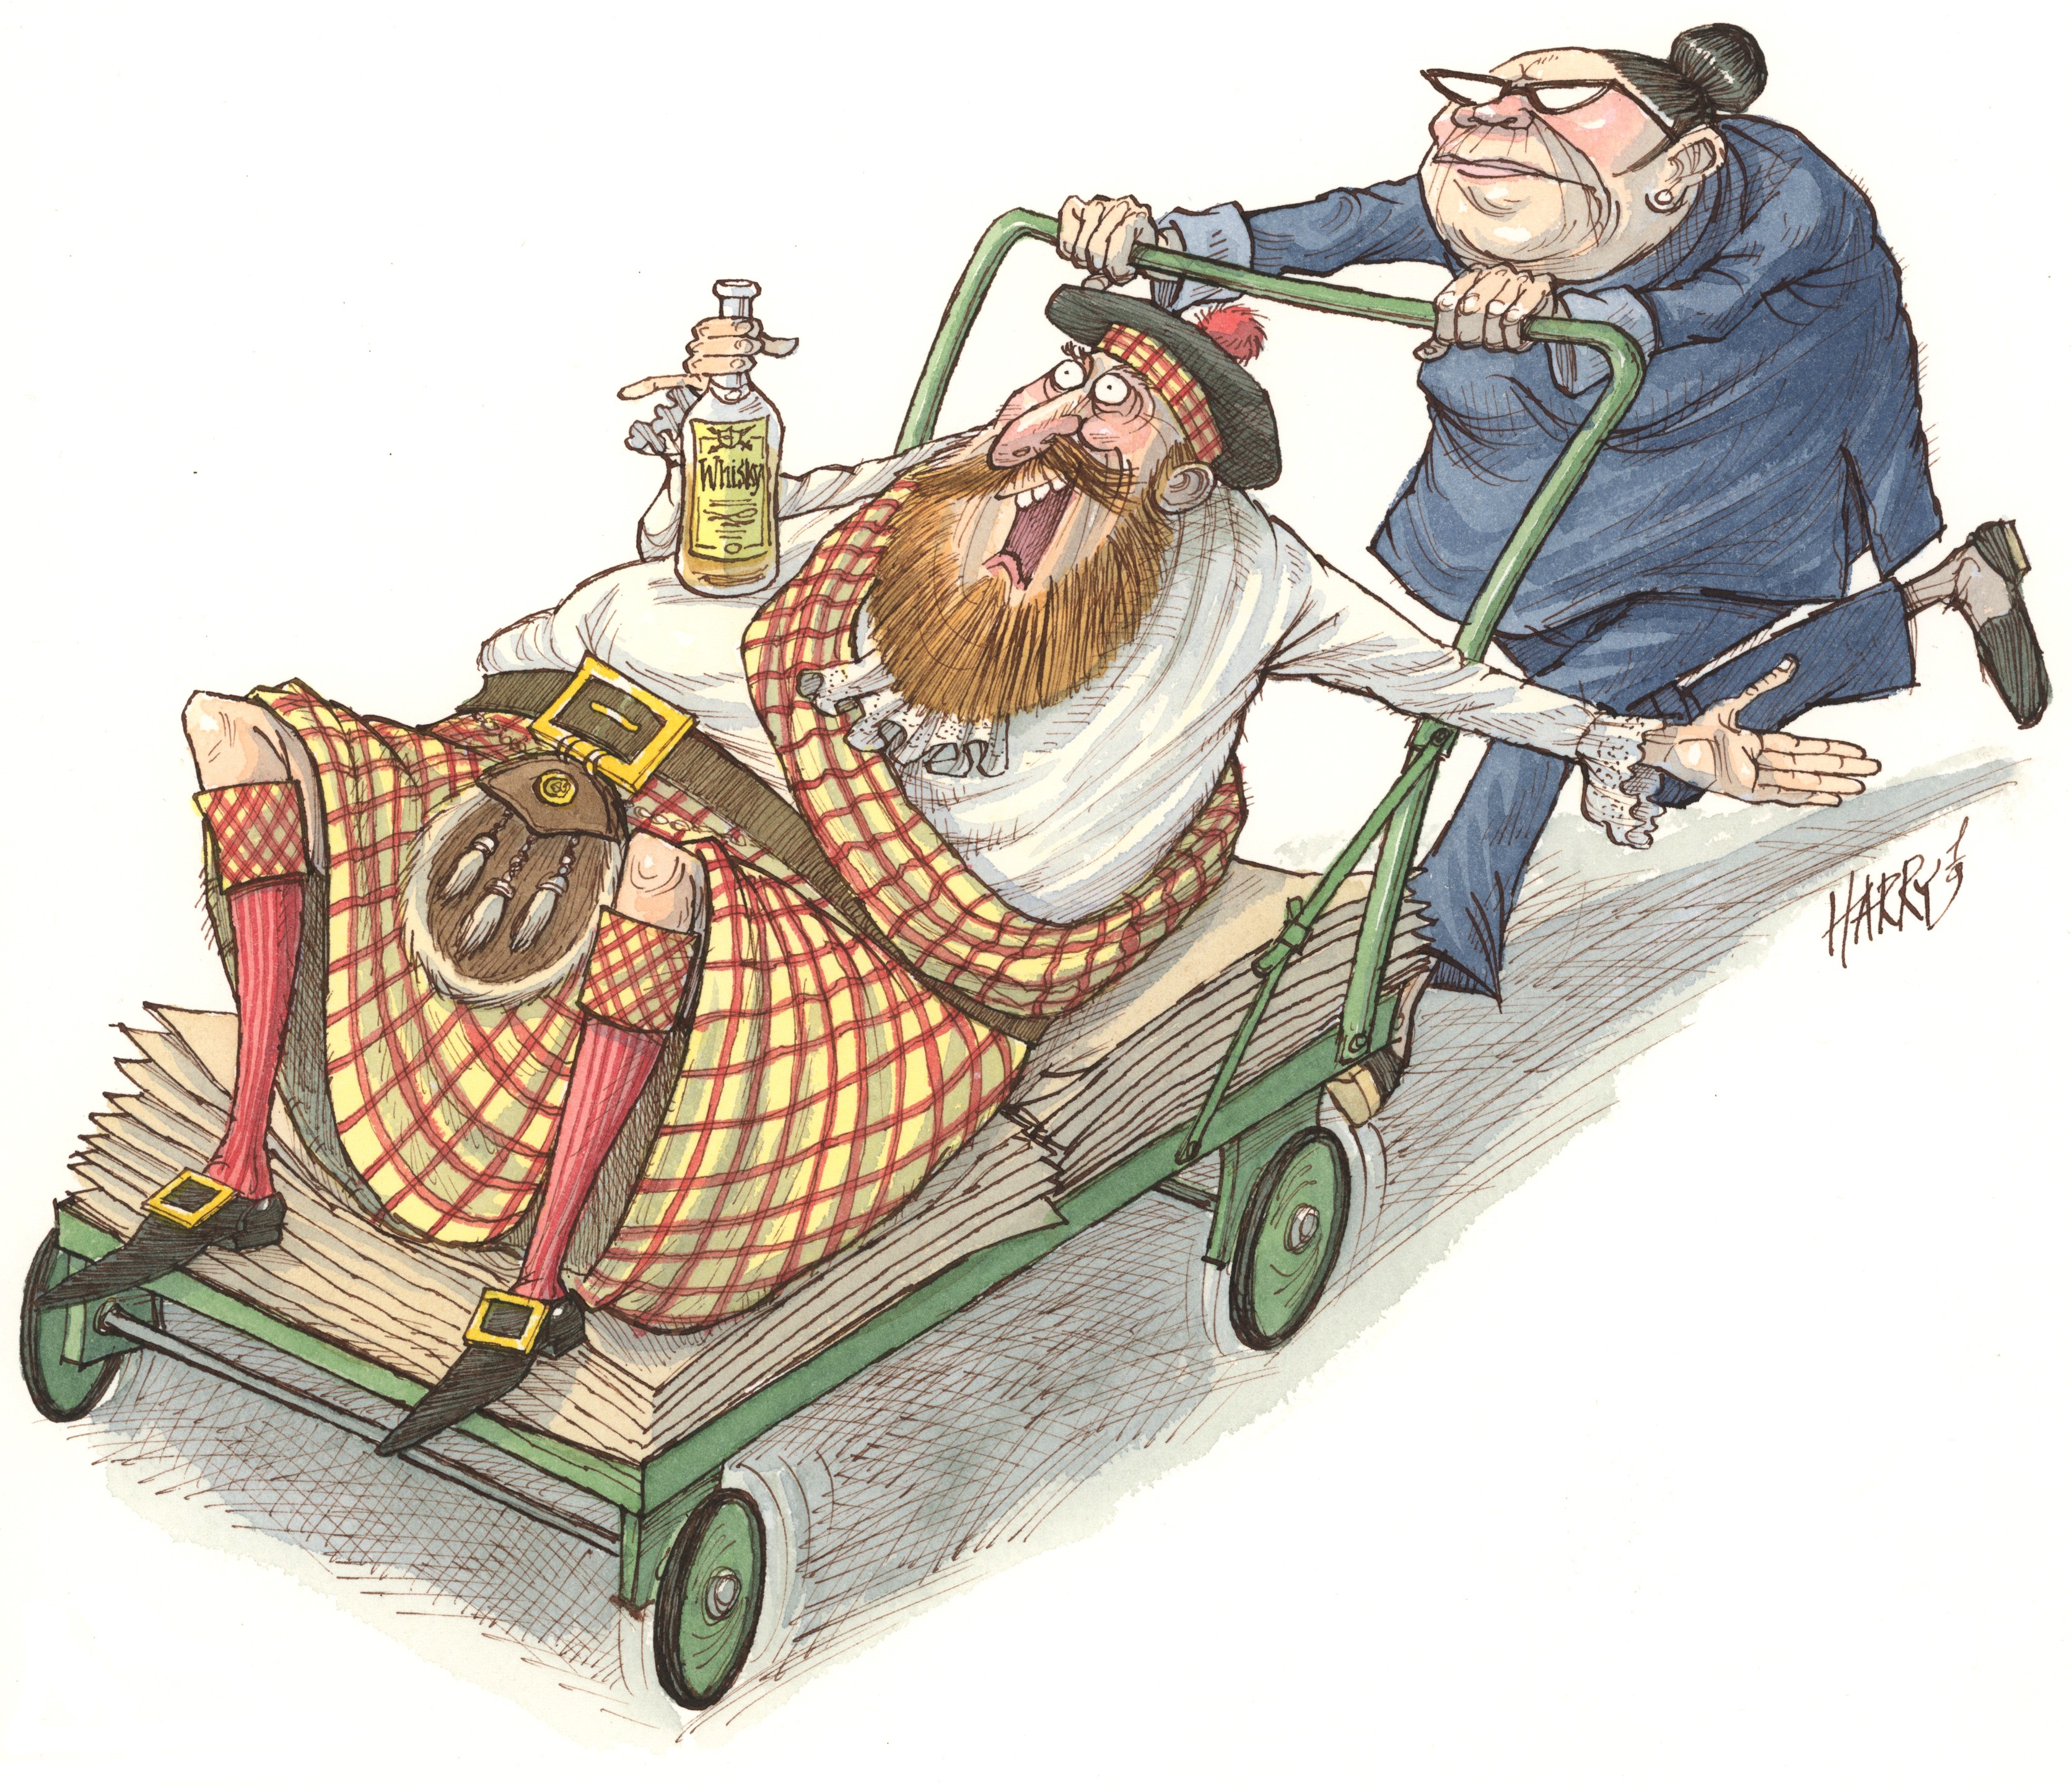 Some regional Scottish New Year’s Eve traditions are somewhat hair-raising, and under no circumstances should be attempted elsewhere. Illustration: Harry Harrison